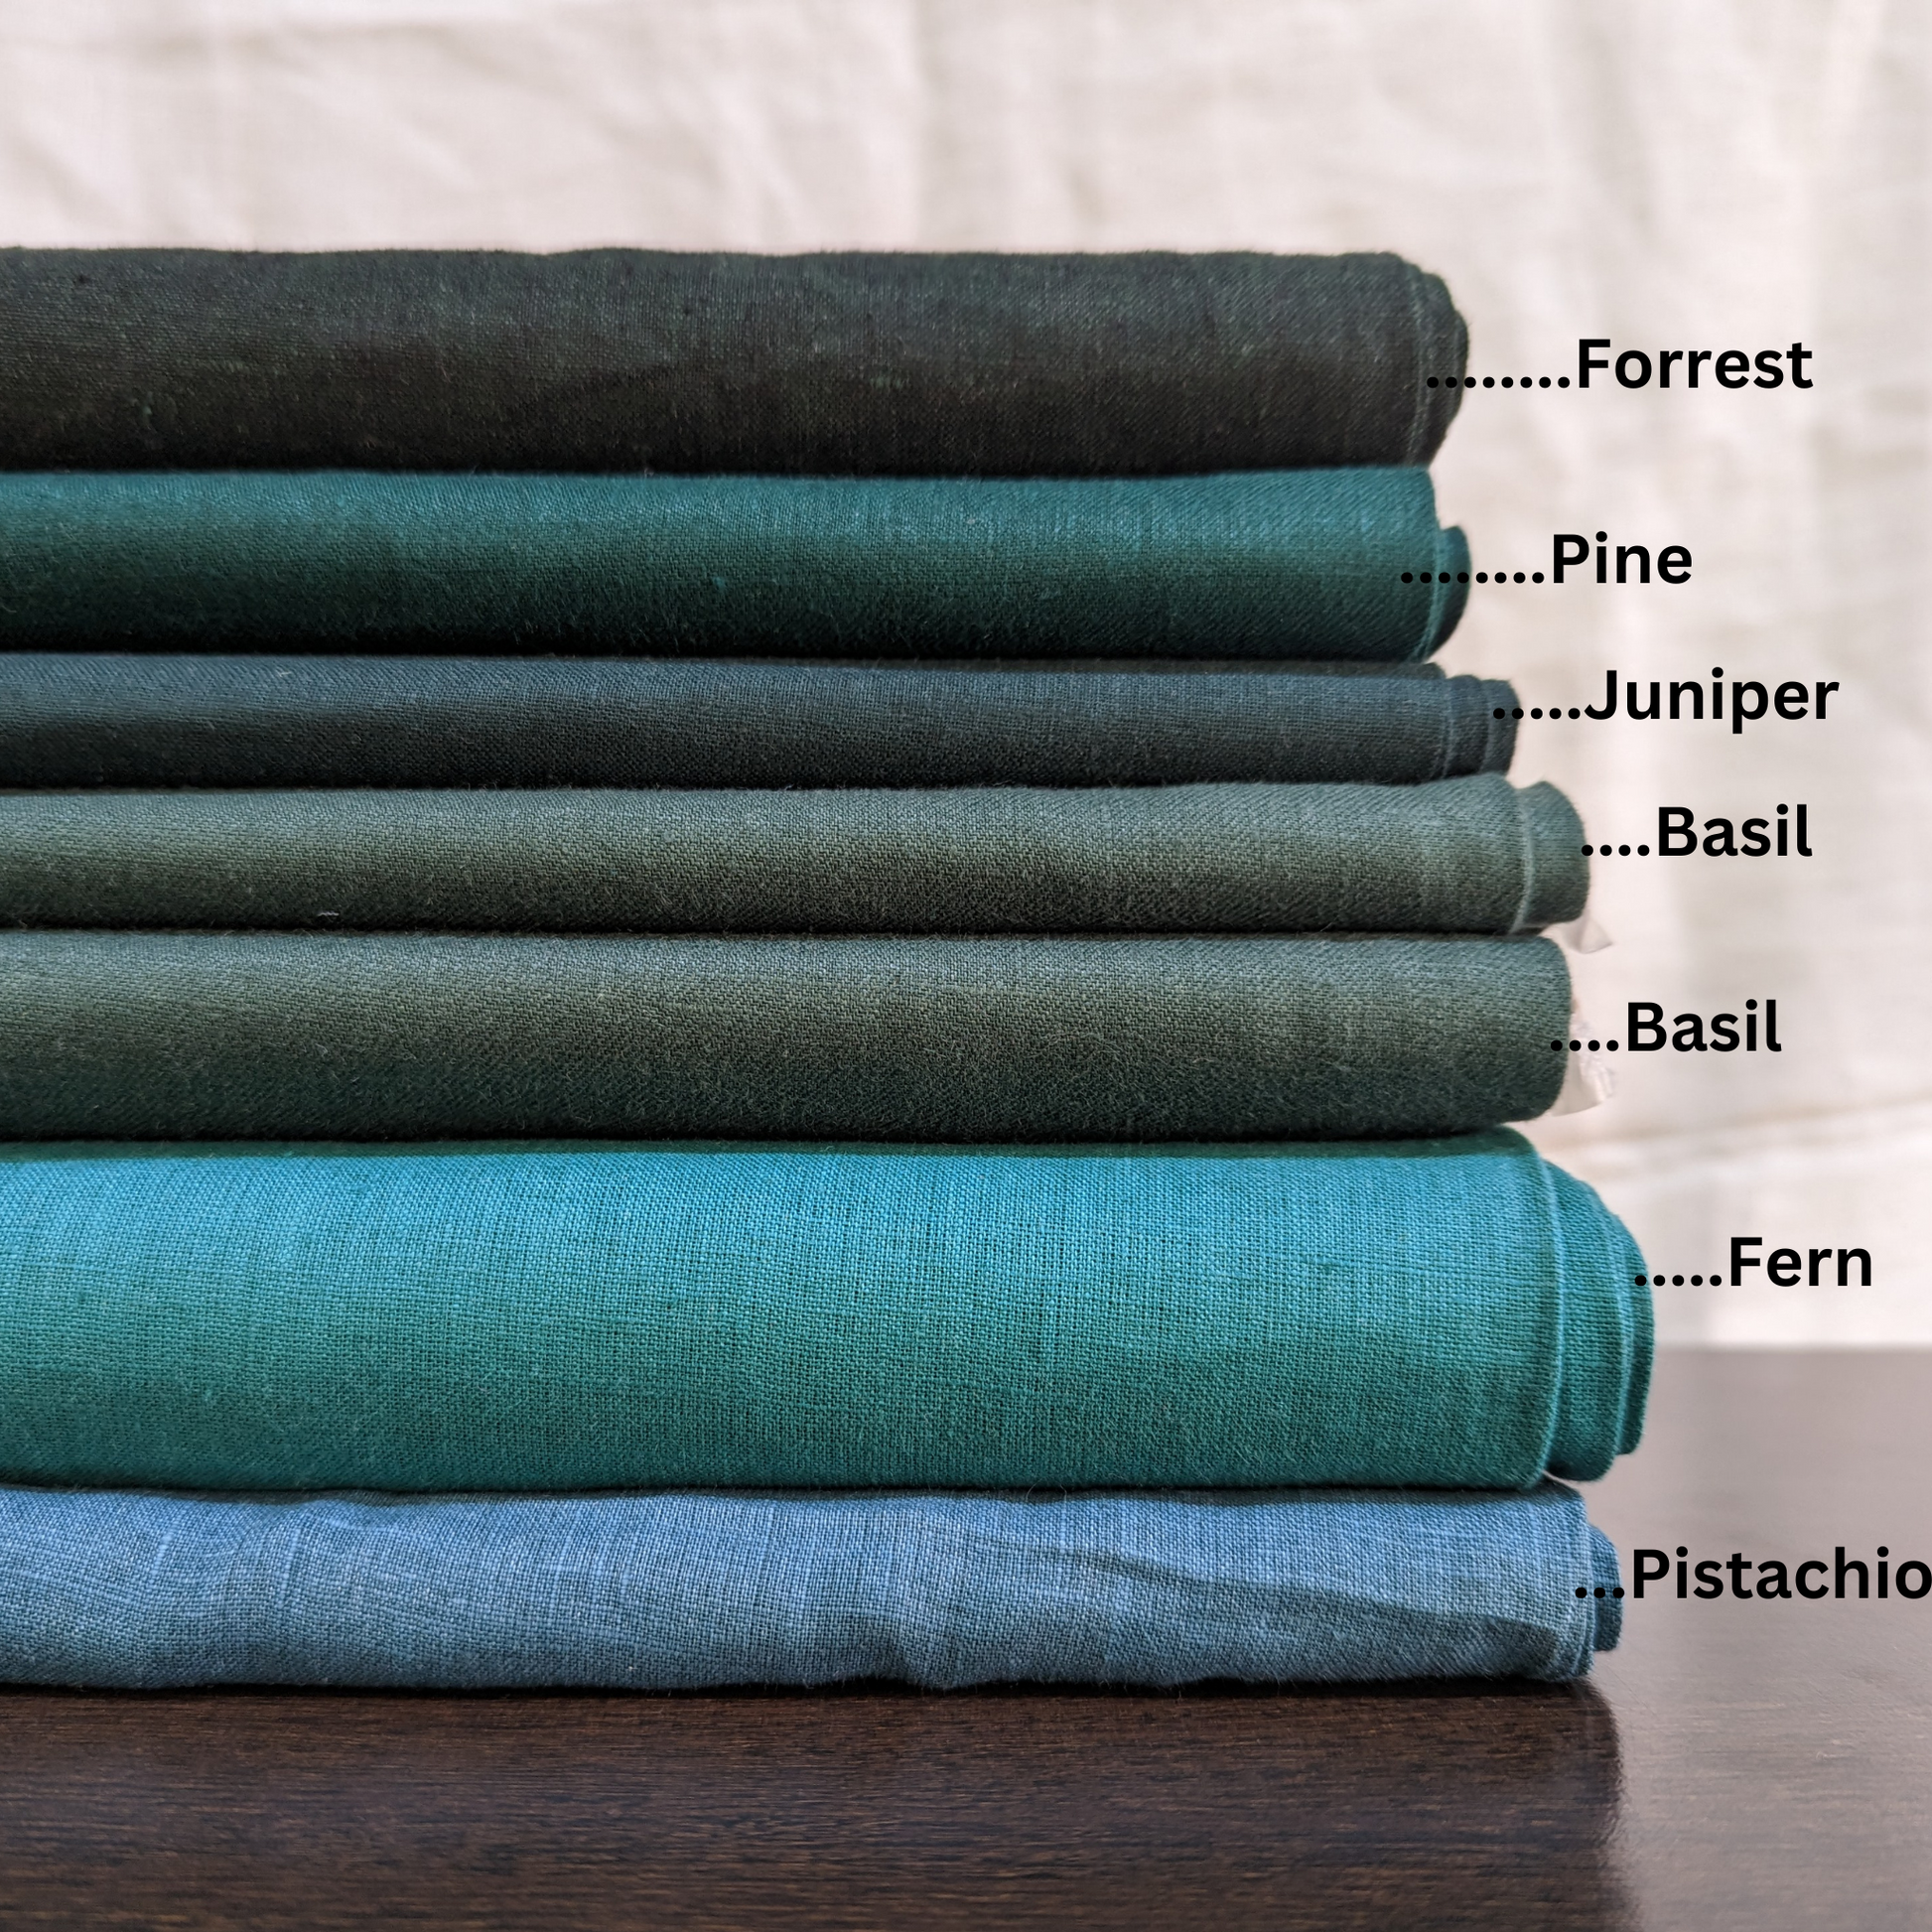 Forrest Greens: Versatile Pure Linen Fabric, Used for Shirts, Dresses, Tops, Bedding, CORDs - OrganoLinen